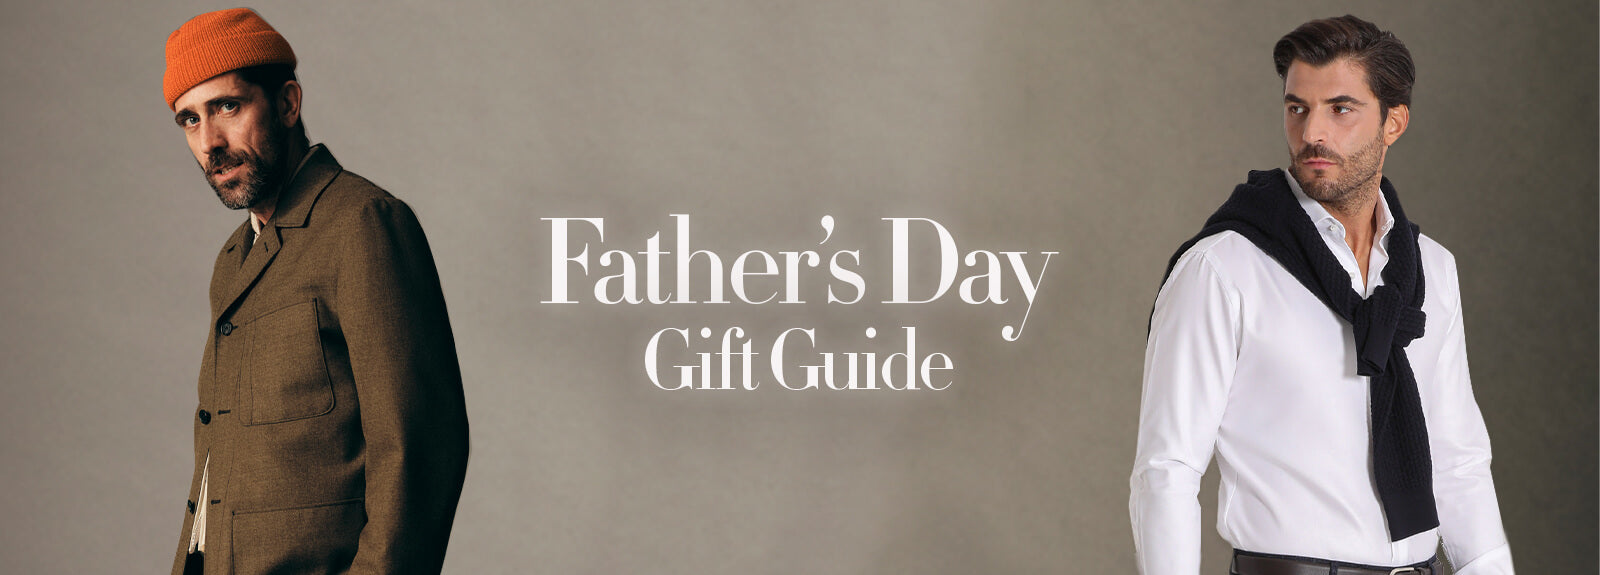 Father's Day Gift Guide for Every Type of Dad or Husband